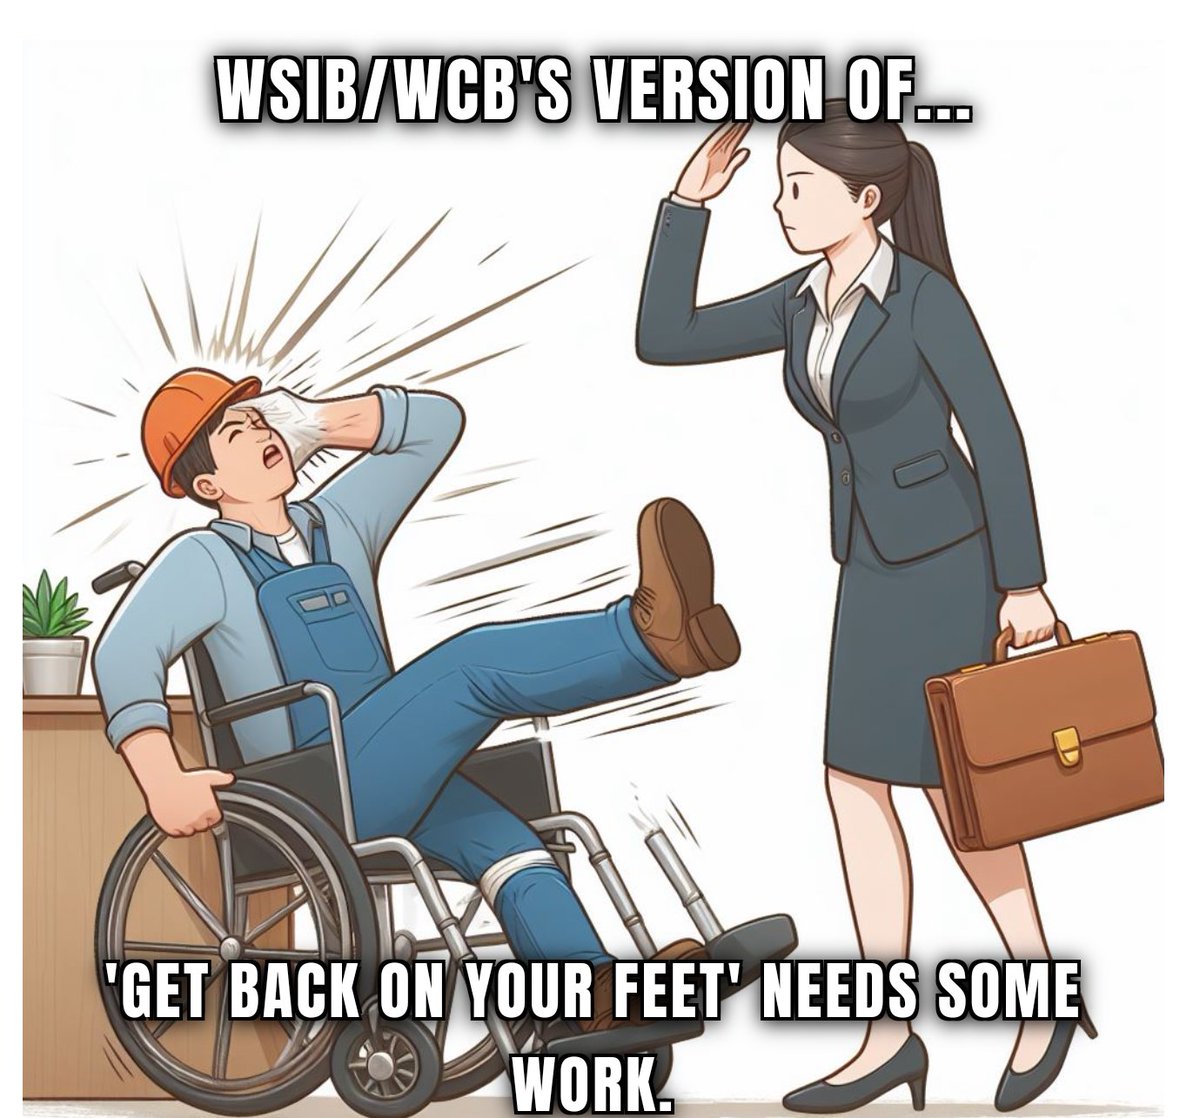 WSIB/WCB version of 'get back on your feet' needs some work. Injured workers deserve better!  Let's ensure they receive the support and care they need for a REAL recovery. #WorkersComp #InjuredWorkers #JusticeForWorkers